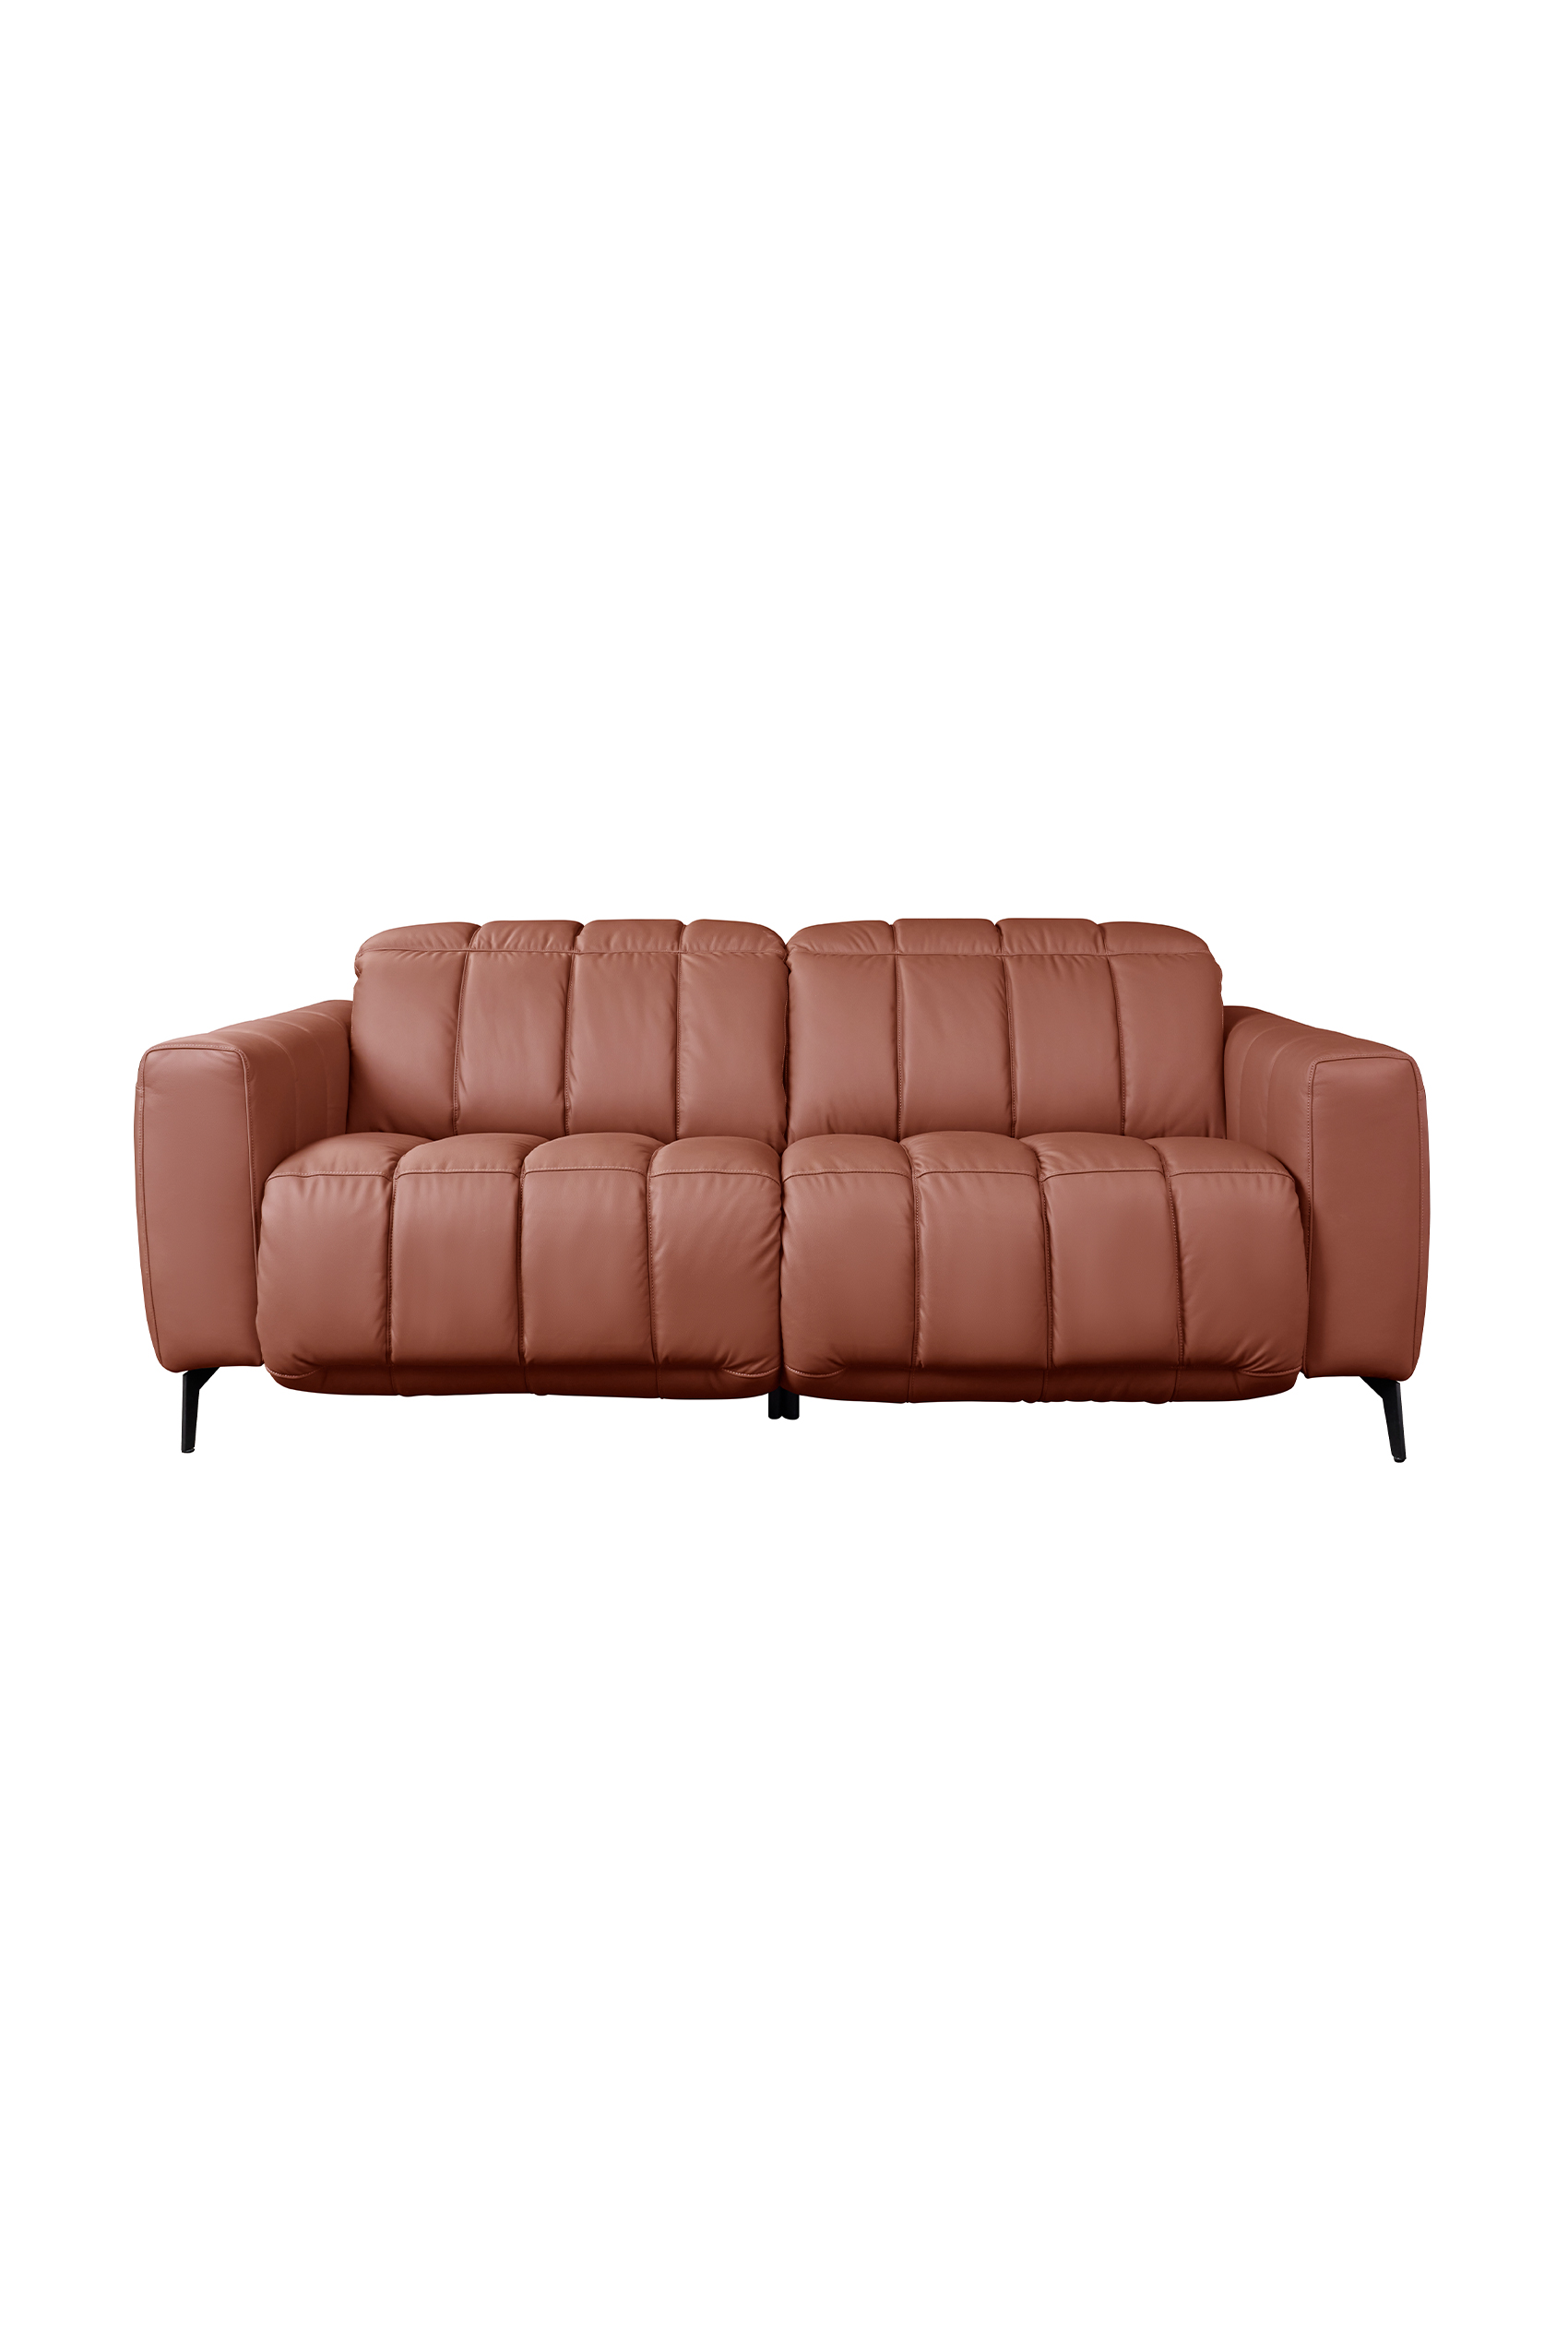 Pesaro Leather Sofa with Dual Recliner